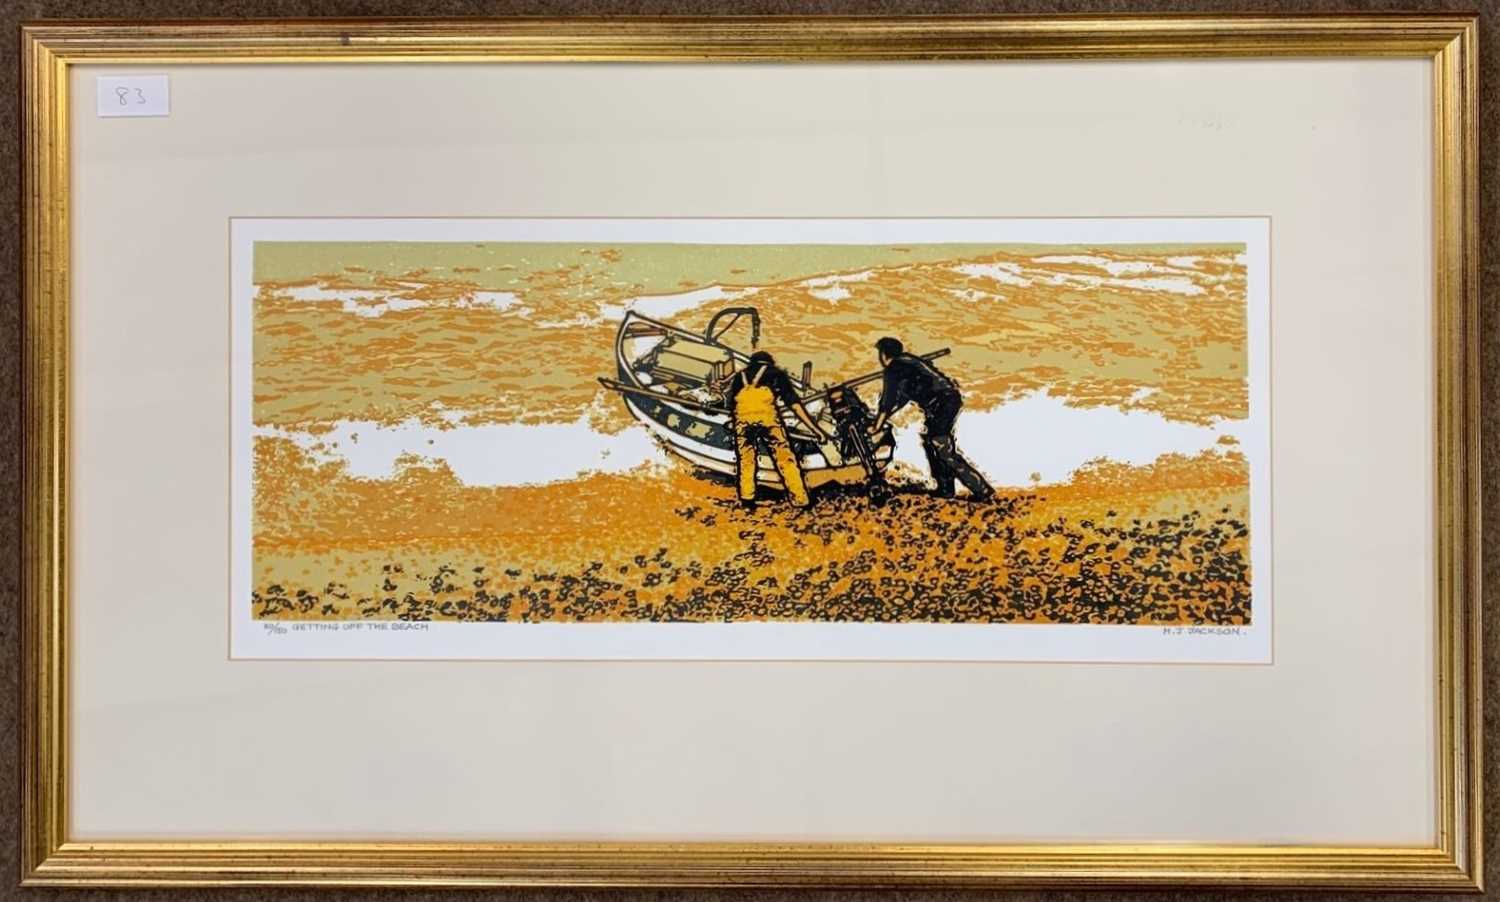 H.J. Jackson RE (British, 1909-1989), 'Getting off the Beach', limited edition linocut, signed and